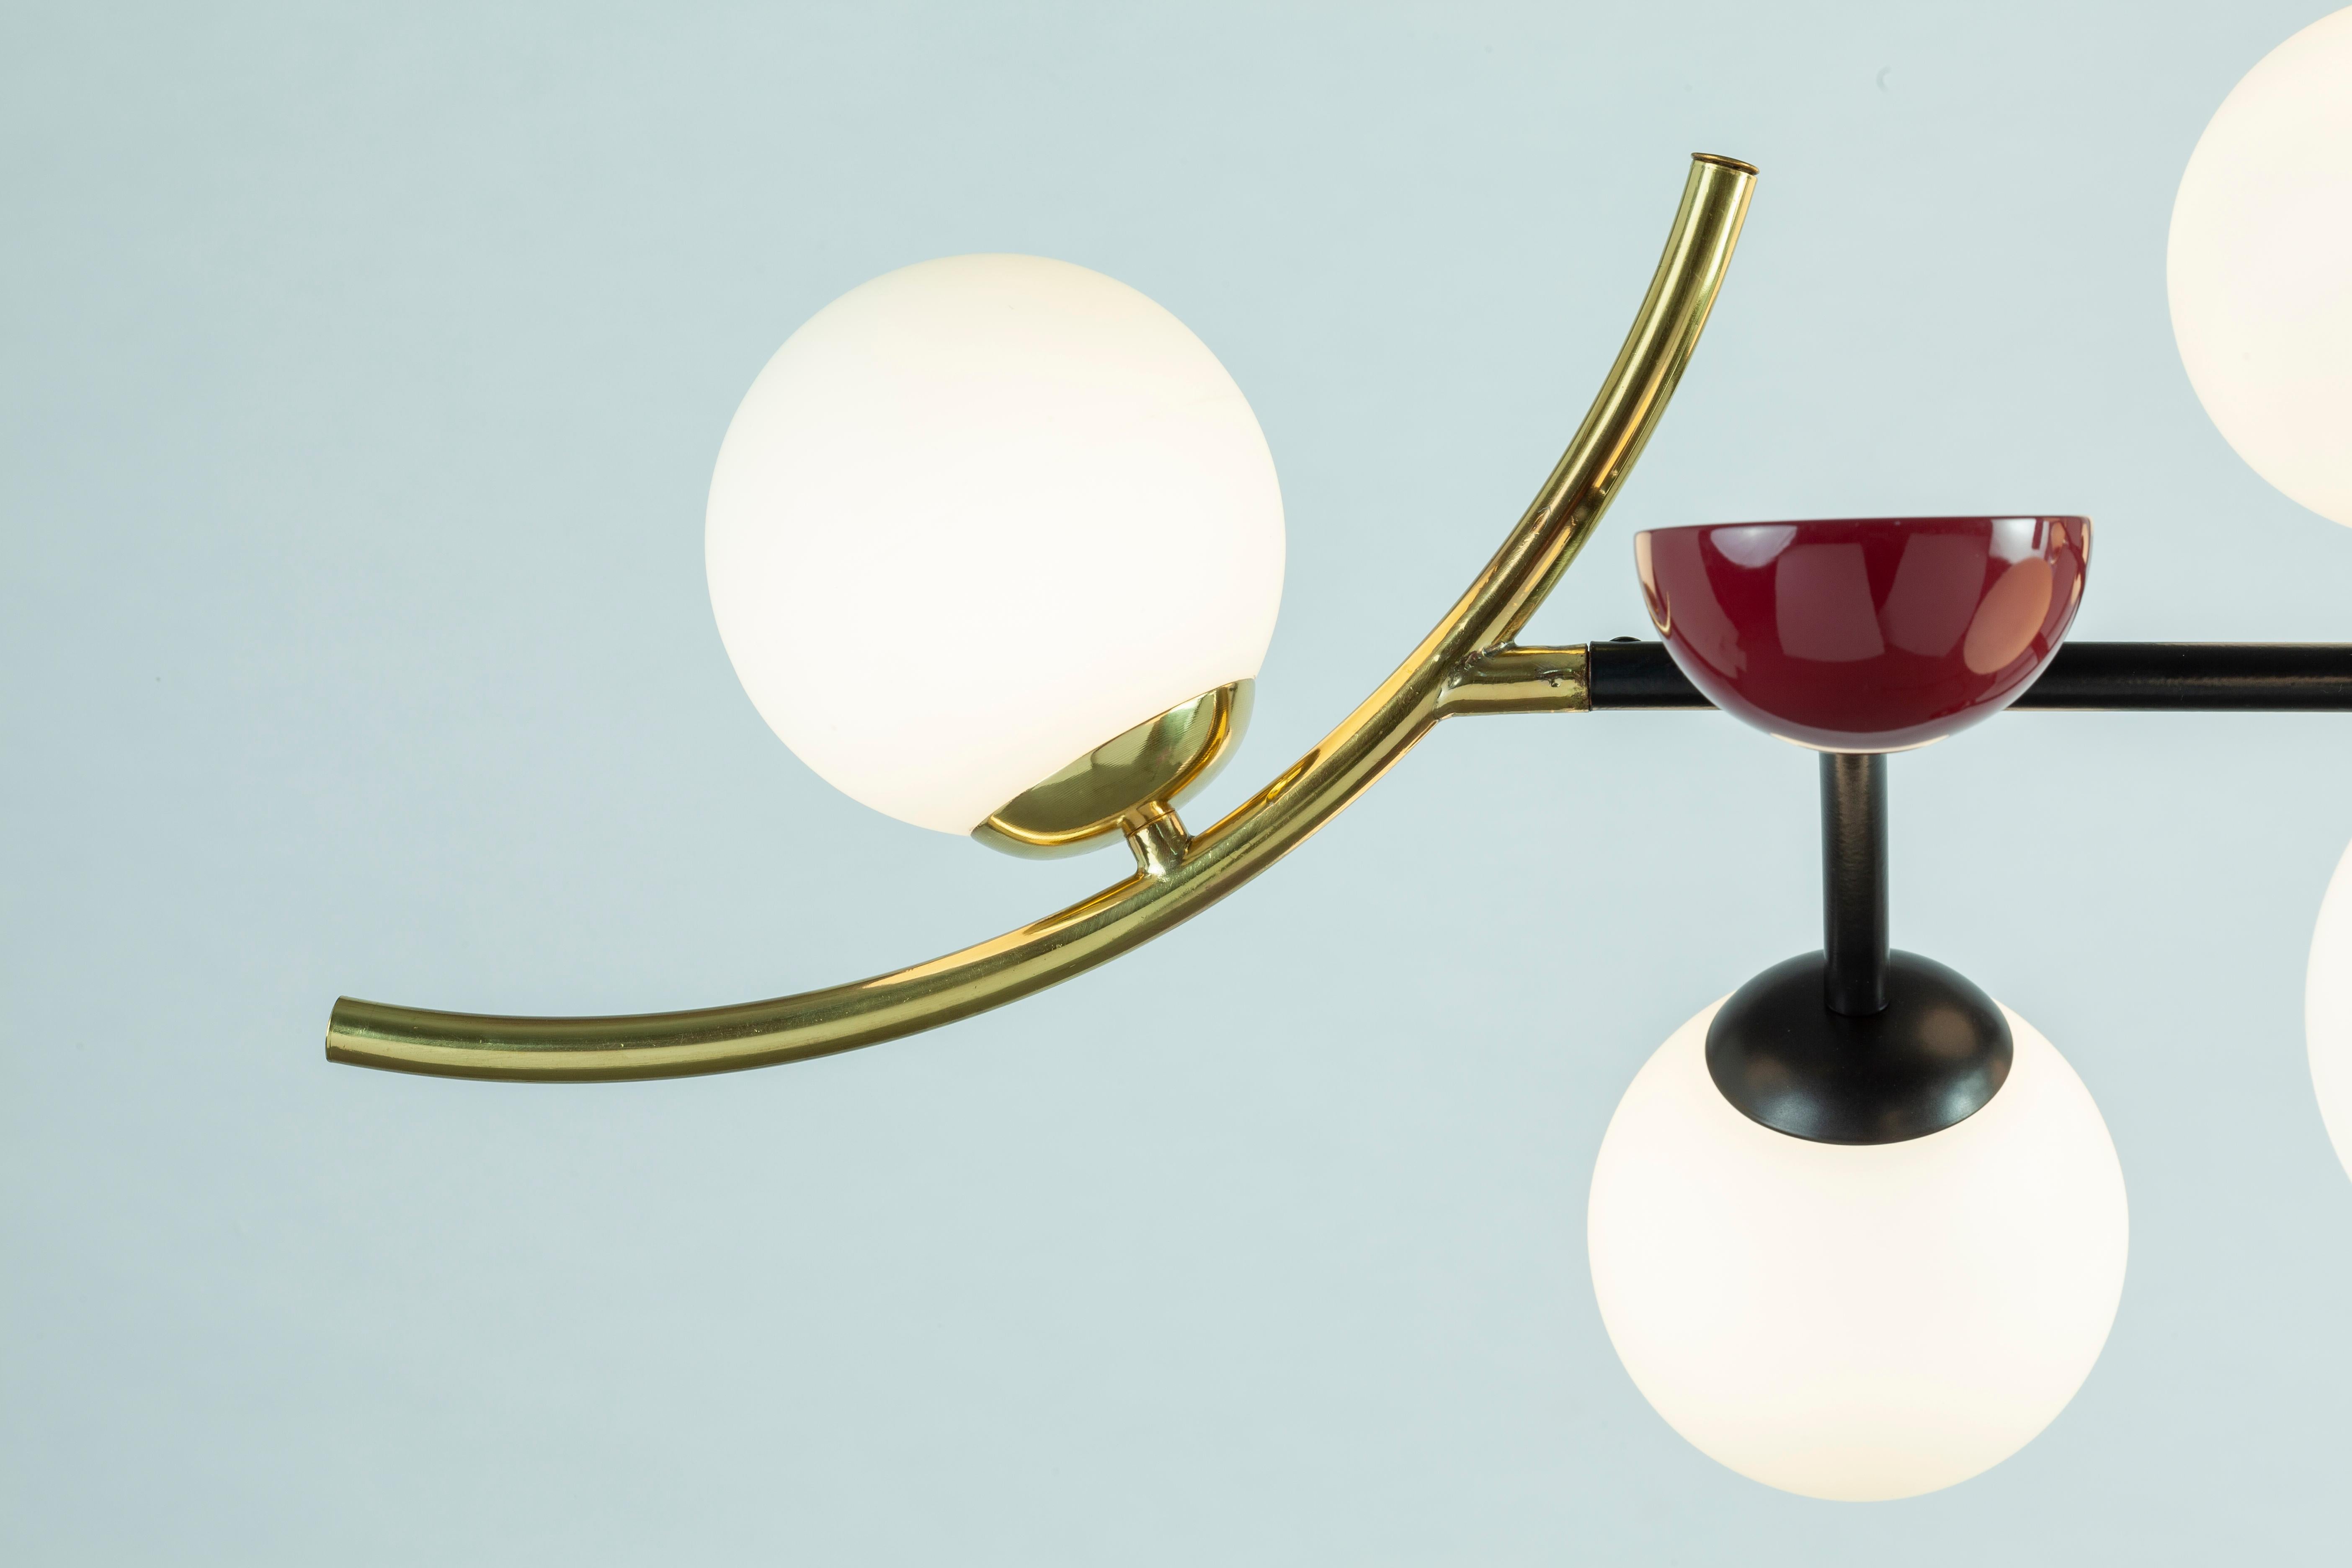 Part ambient light, part artwork, Helio I pendant lamp will highlight any space in all the right ways thanks to its Frosted Glass Globe and sleek Polished Brass details. 

A collection that is raw and expressive yet sophisticated, where each lamp